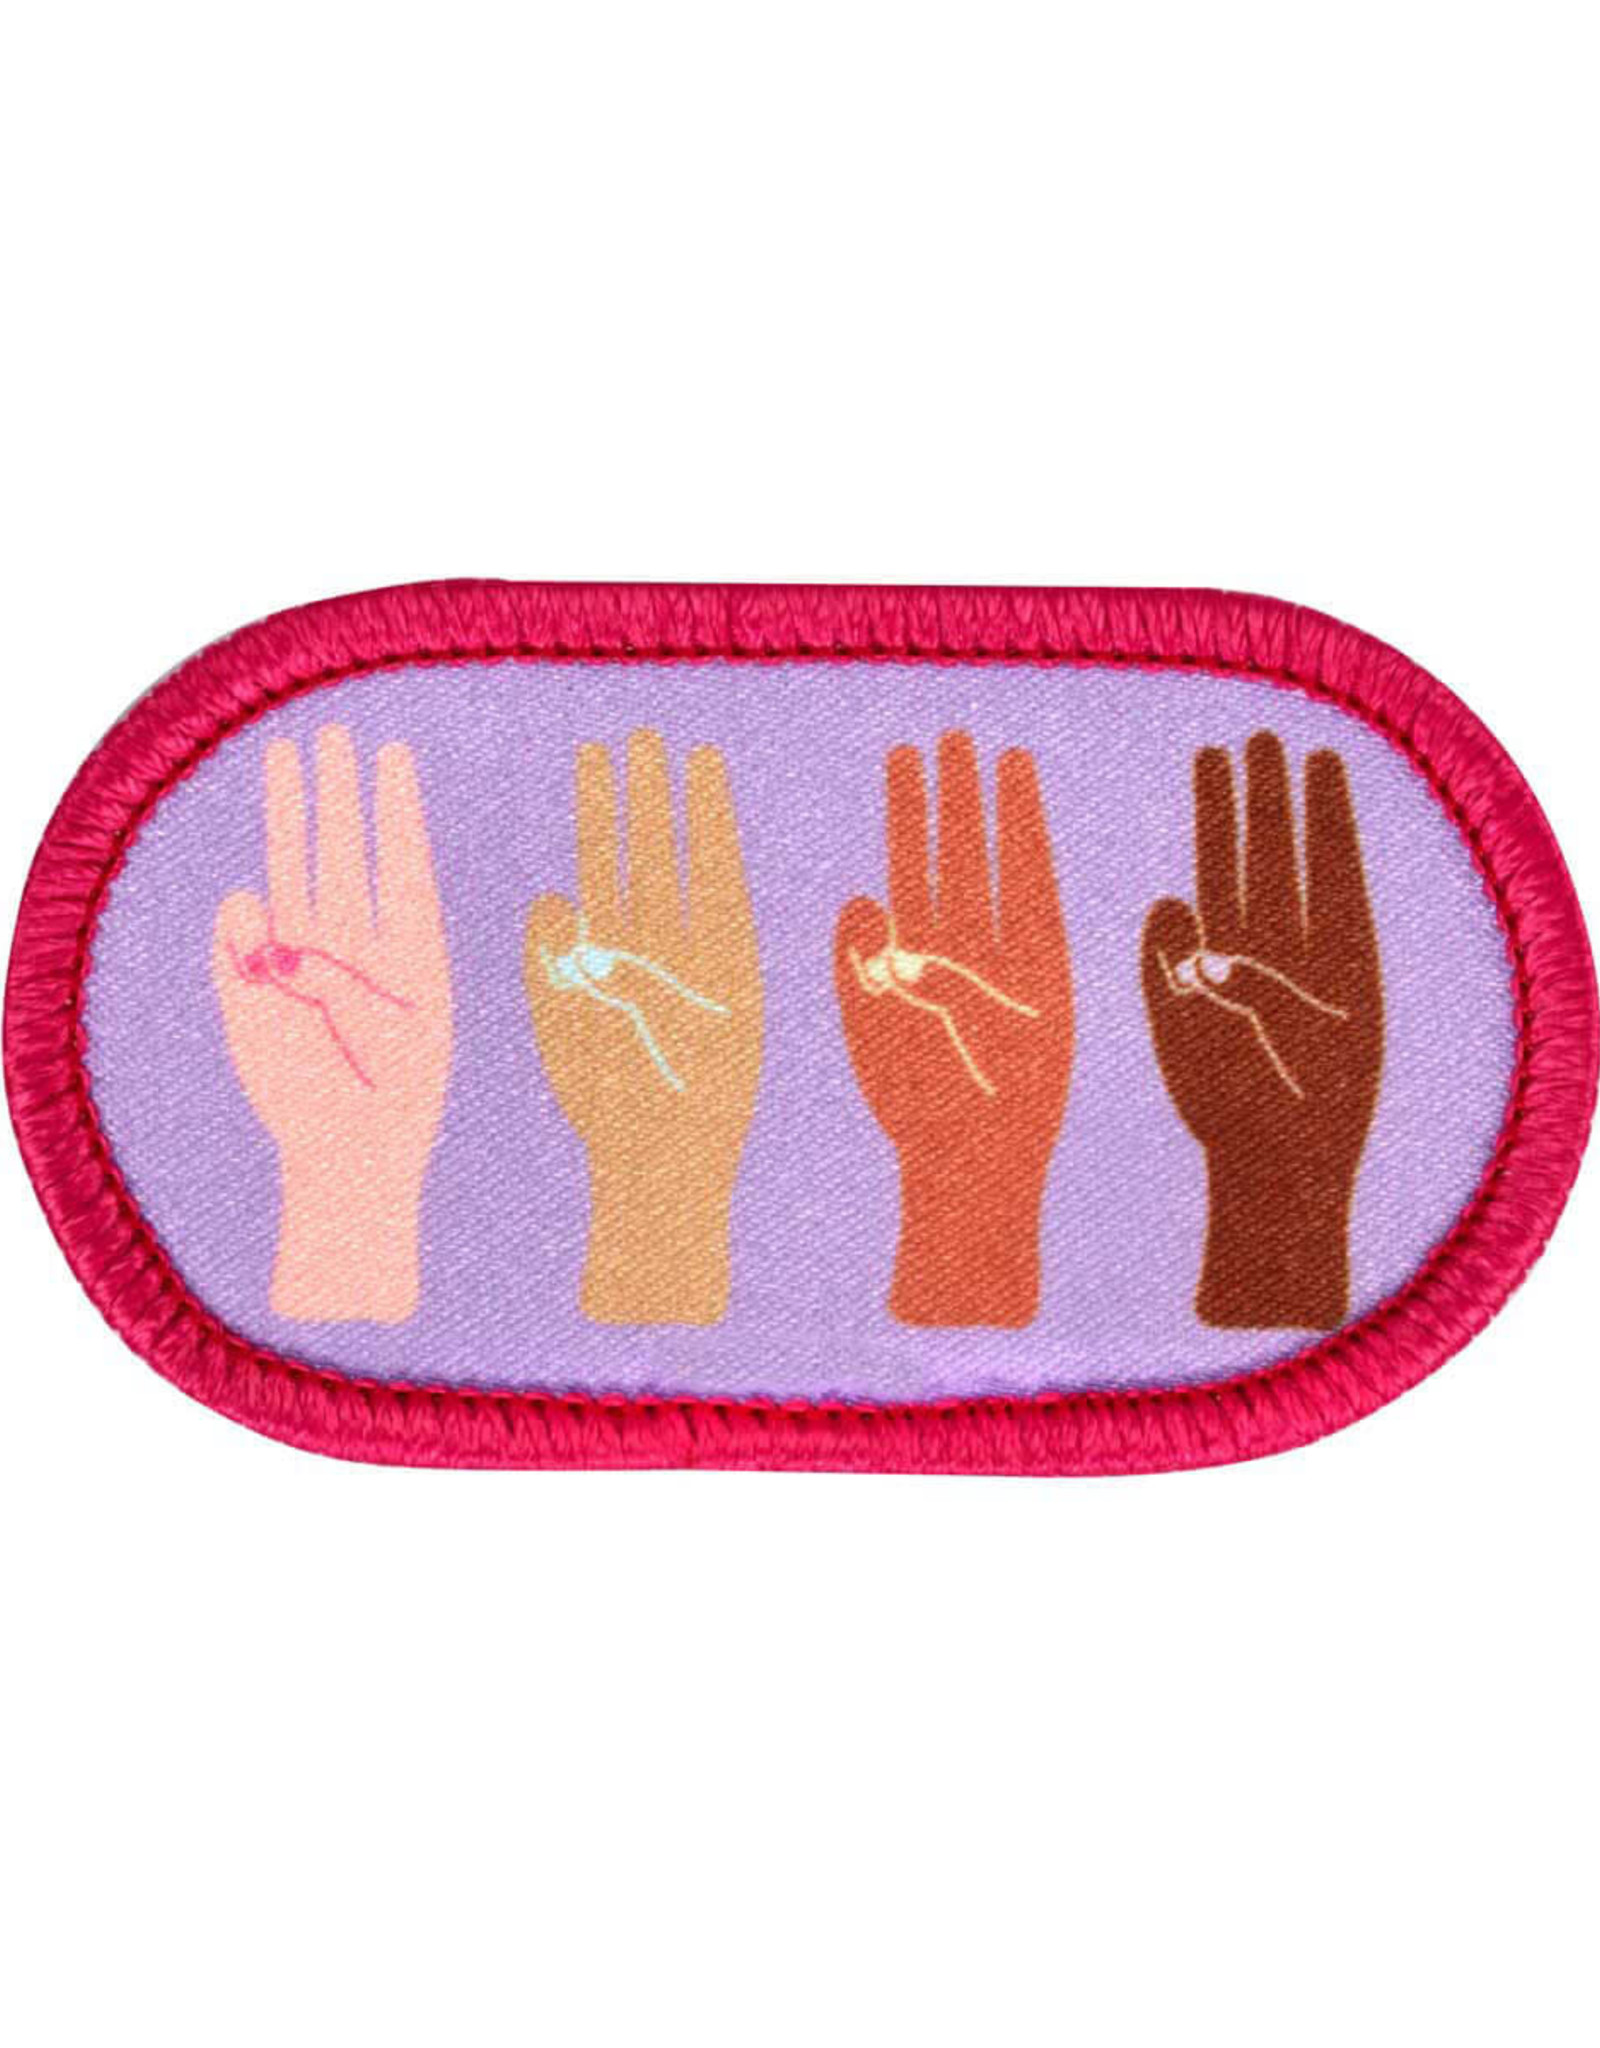 GSUSA Girl Scout Promise Sew-On Patch